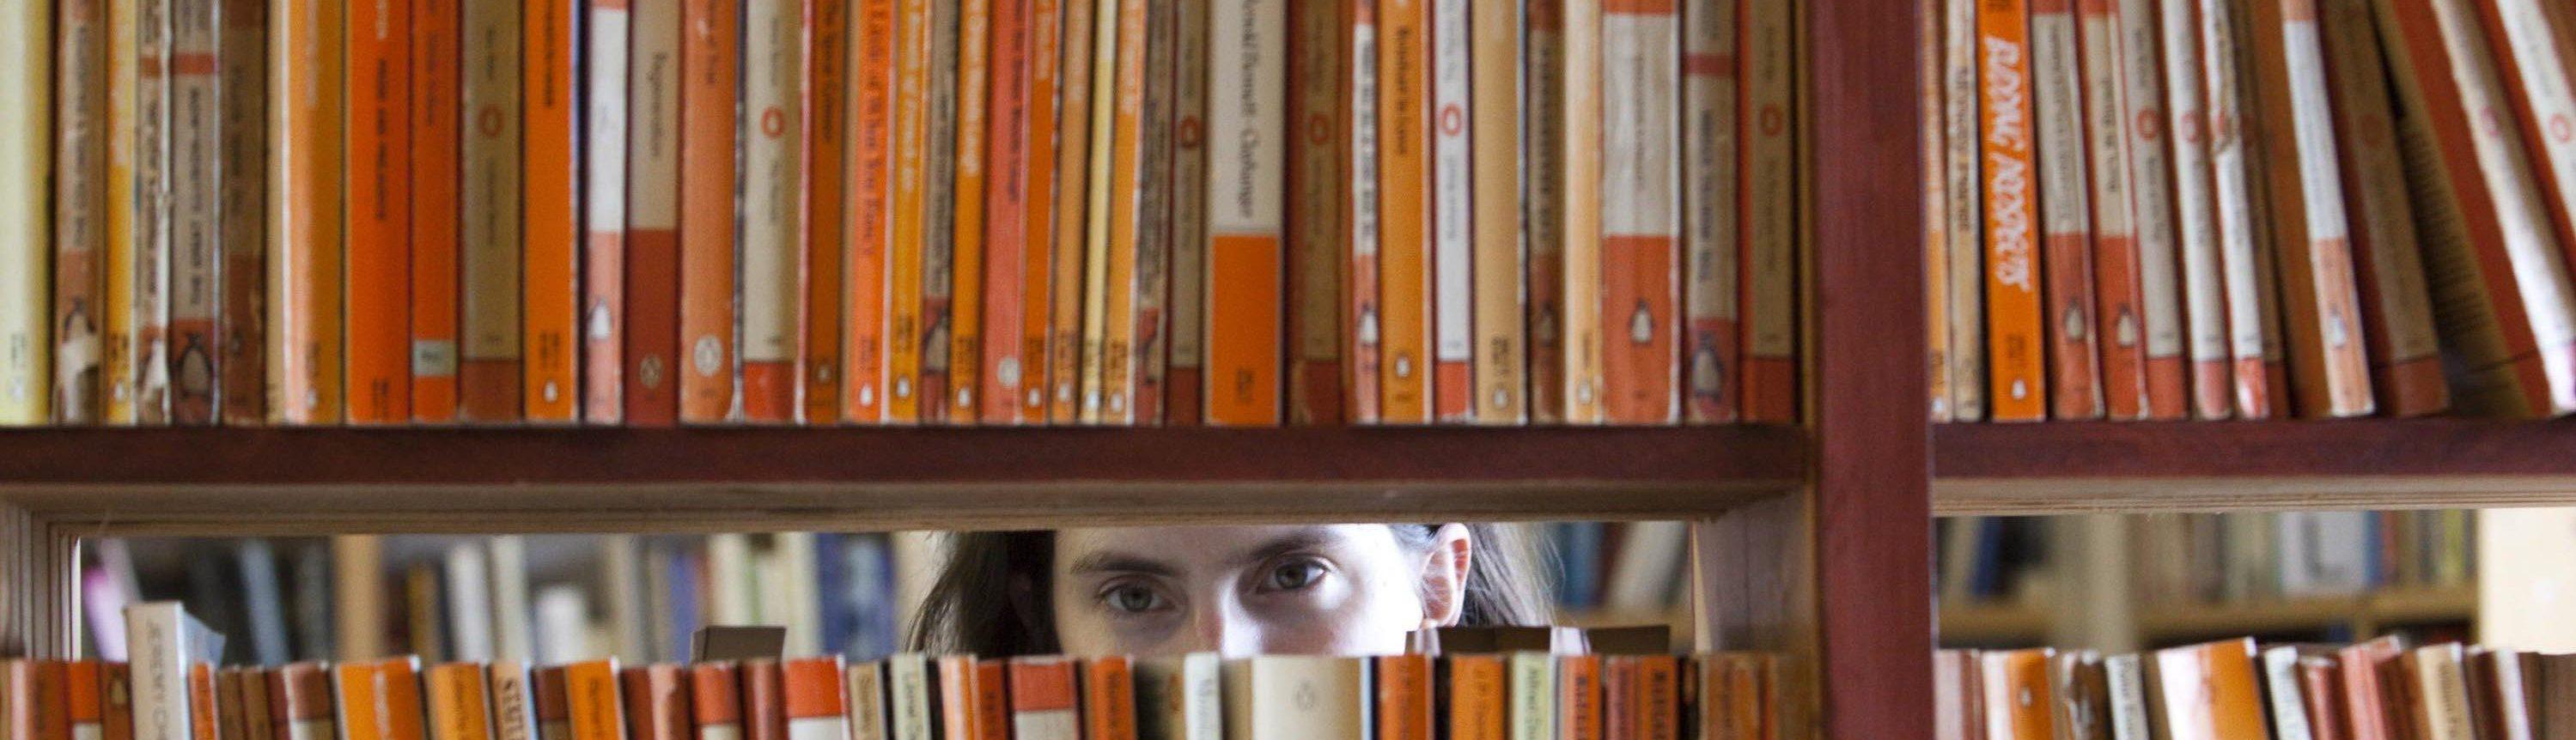 Shelves of old paperback books, a person is peering through the gap in between the top and bottom shelves.